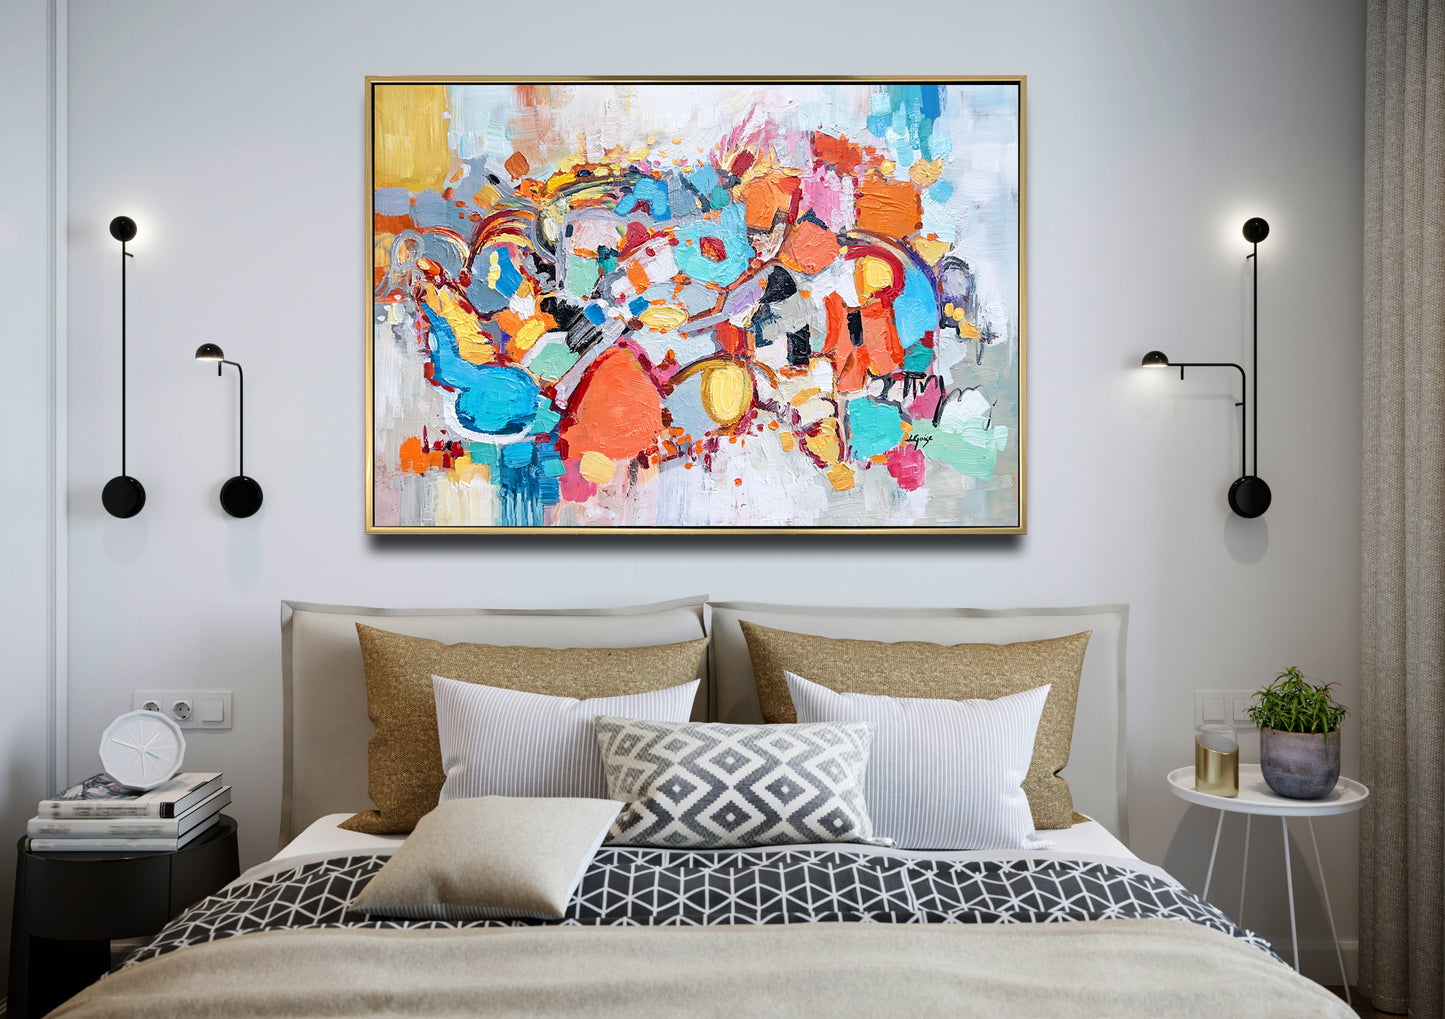 a large painting hangs above a bed in a bedroom